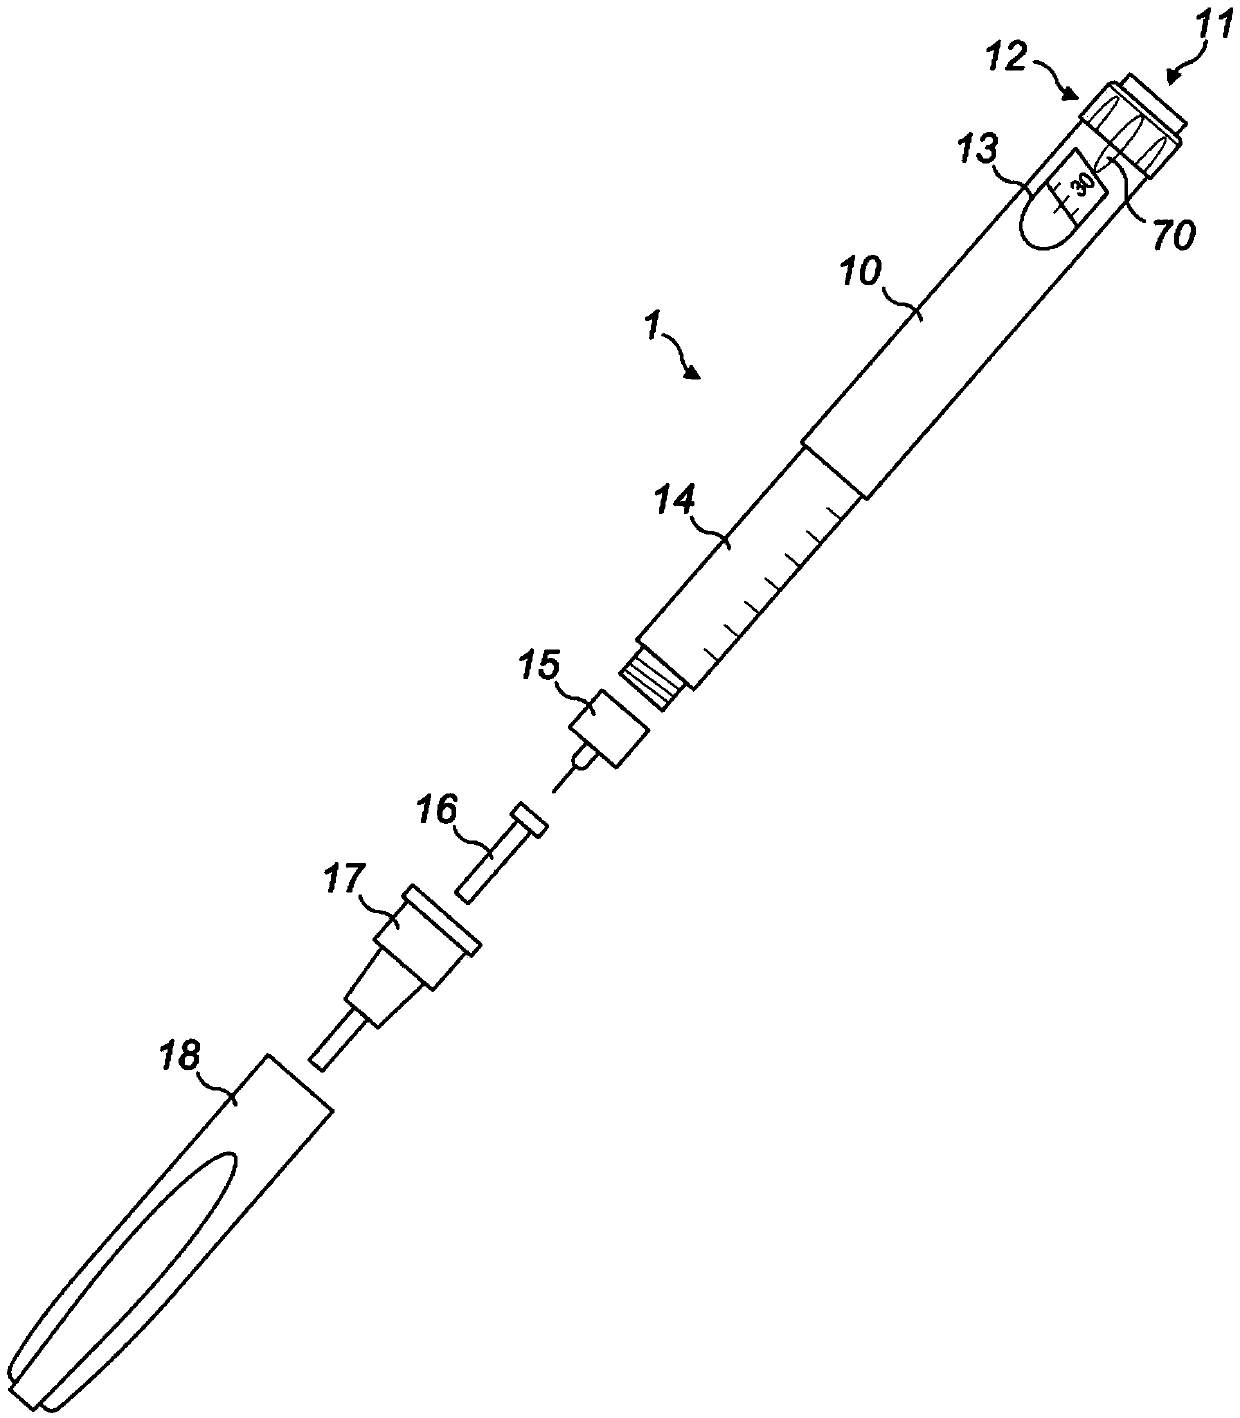 Supplemental device for attachment to an injection device